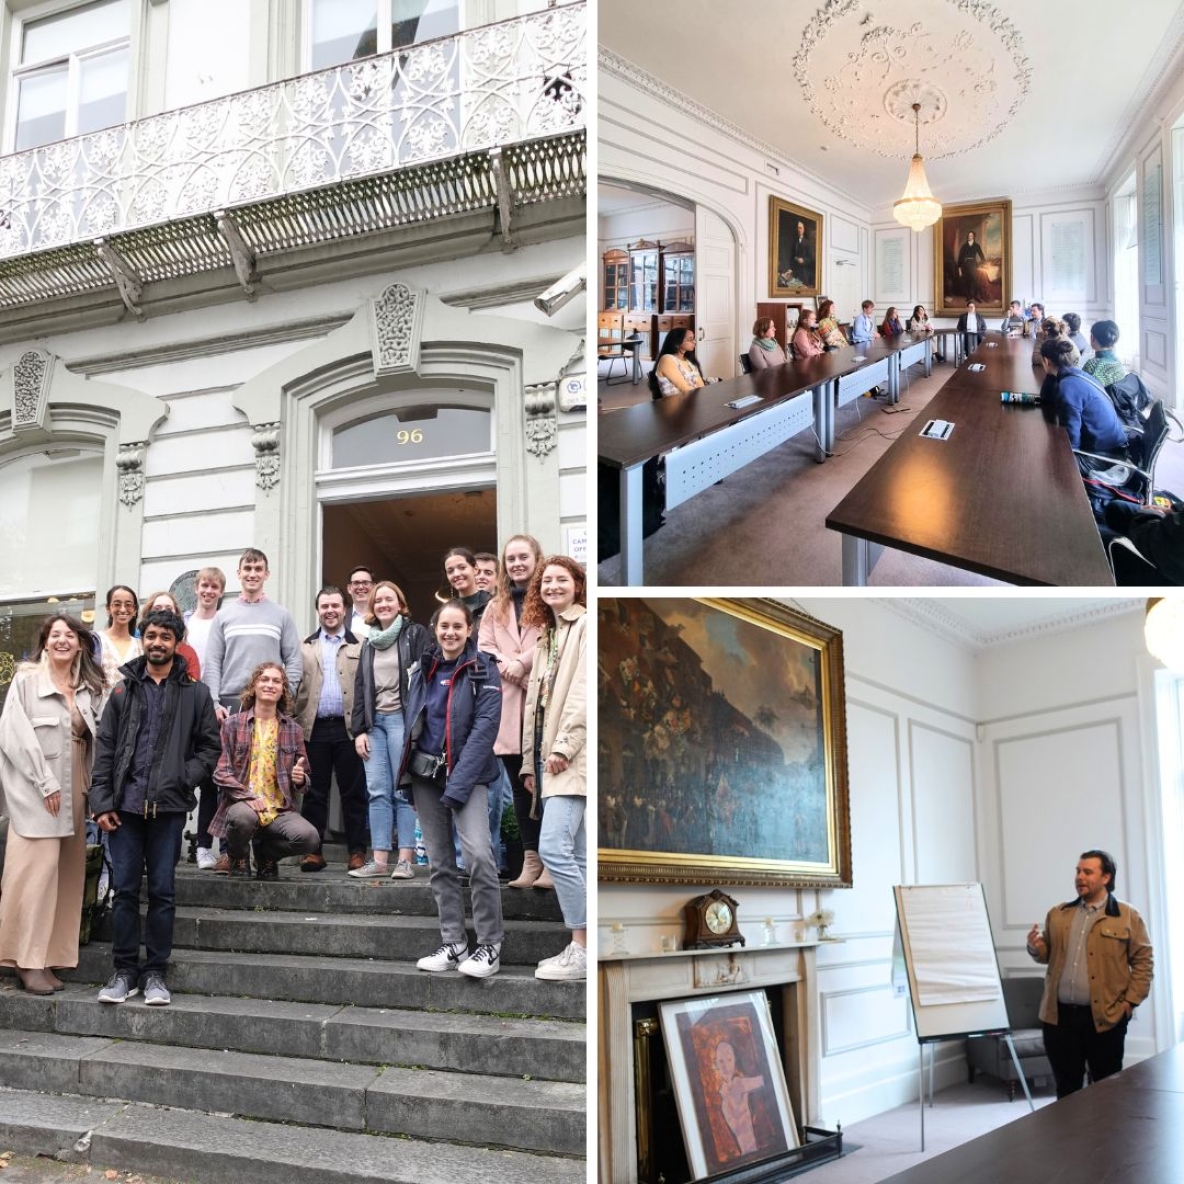 A collage of photos from the visit to Limerick Chamber. In one photo, the students and staff of Chamber are gathered on the entrance steps to the building. In the second photo, the students and staff are sat around a boardroom table engaged in discussion. In the final photo, a staff member is standing beside a wall-hung painting and explaining its history.